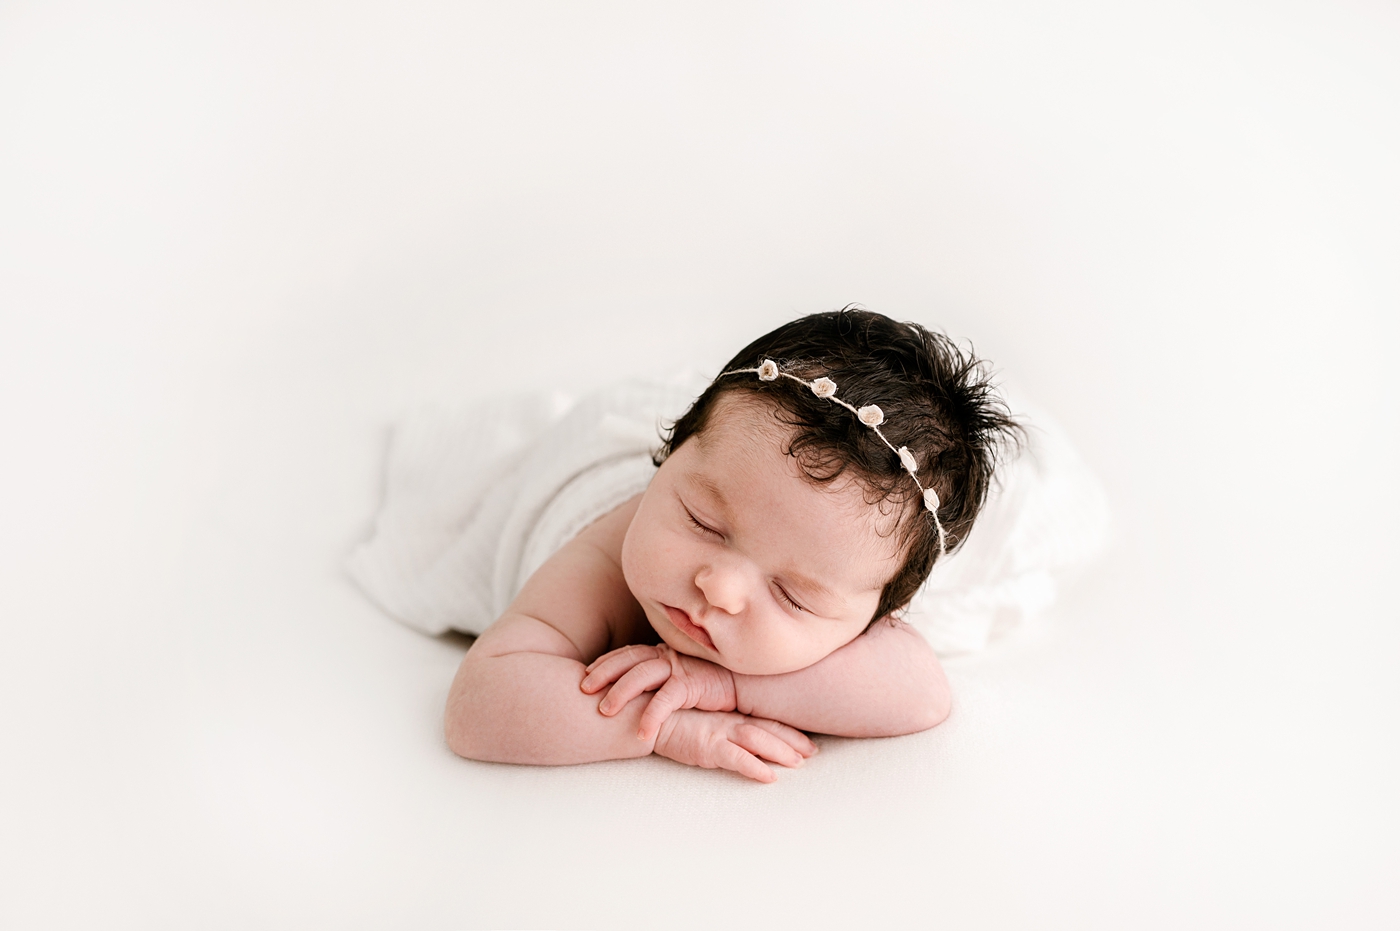 Baby girl poses with her head over her hands during studio newborn session. Image by Meg Newton Photography.